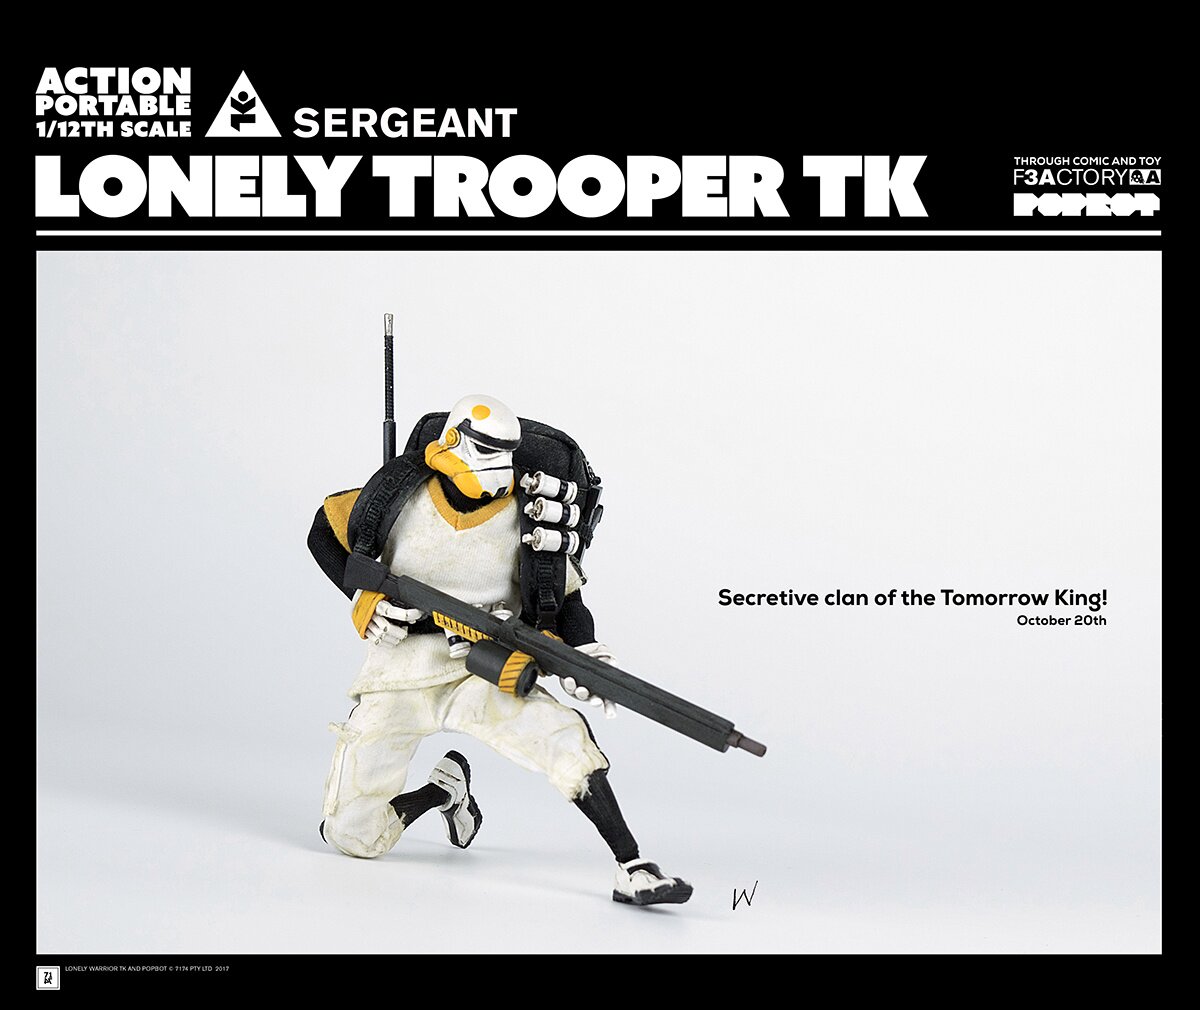 Action Portable 1/12 Scale Lonely Trooper TK Sergeant